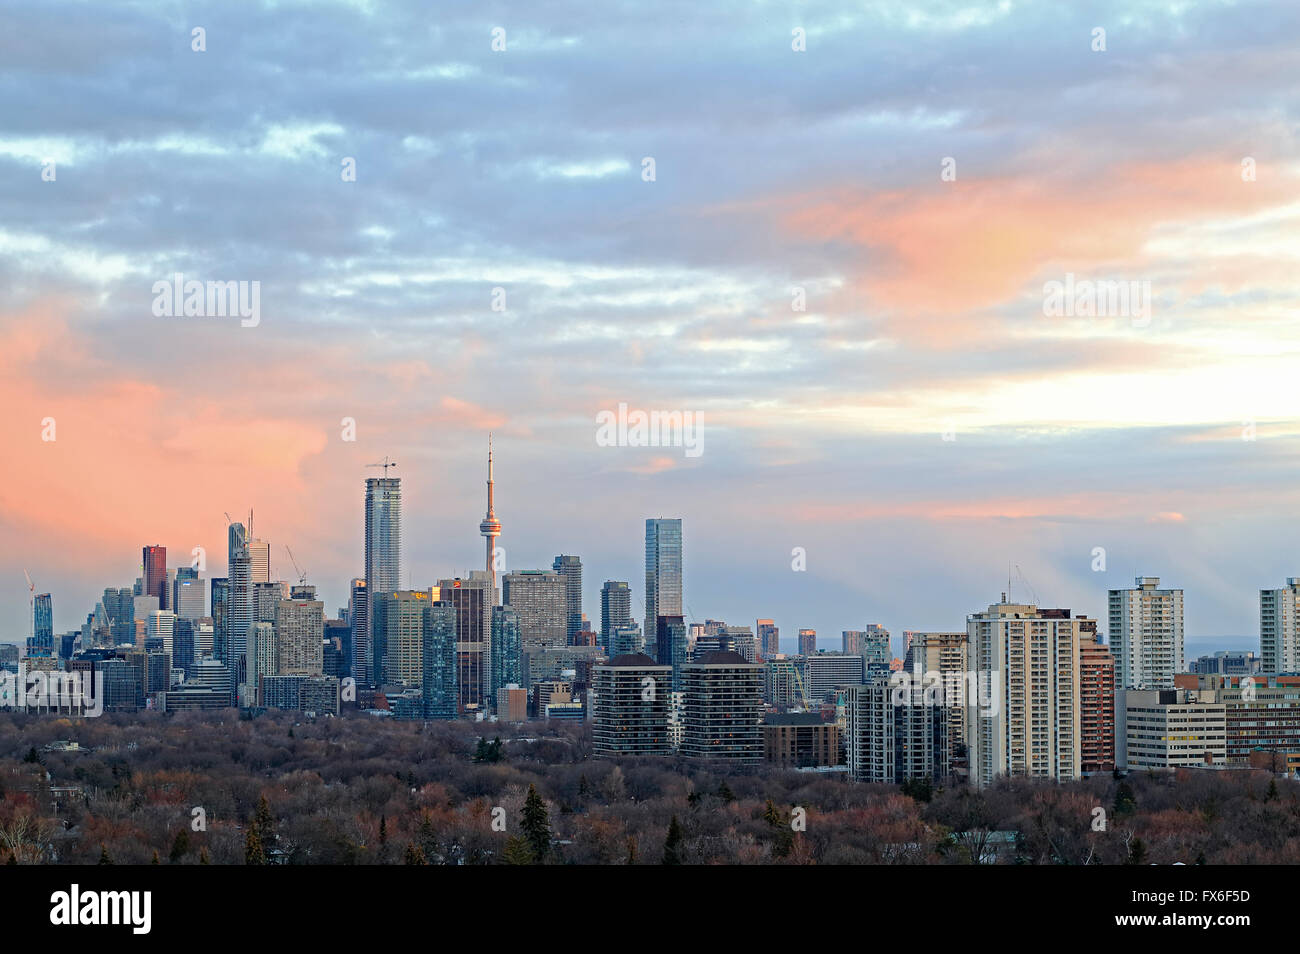 Toronto city skyline with major landmark buildings including CN Tower, corporate and bank buildings in downtown and midtown, wit Stock Photo